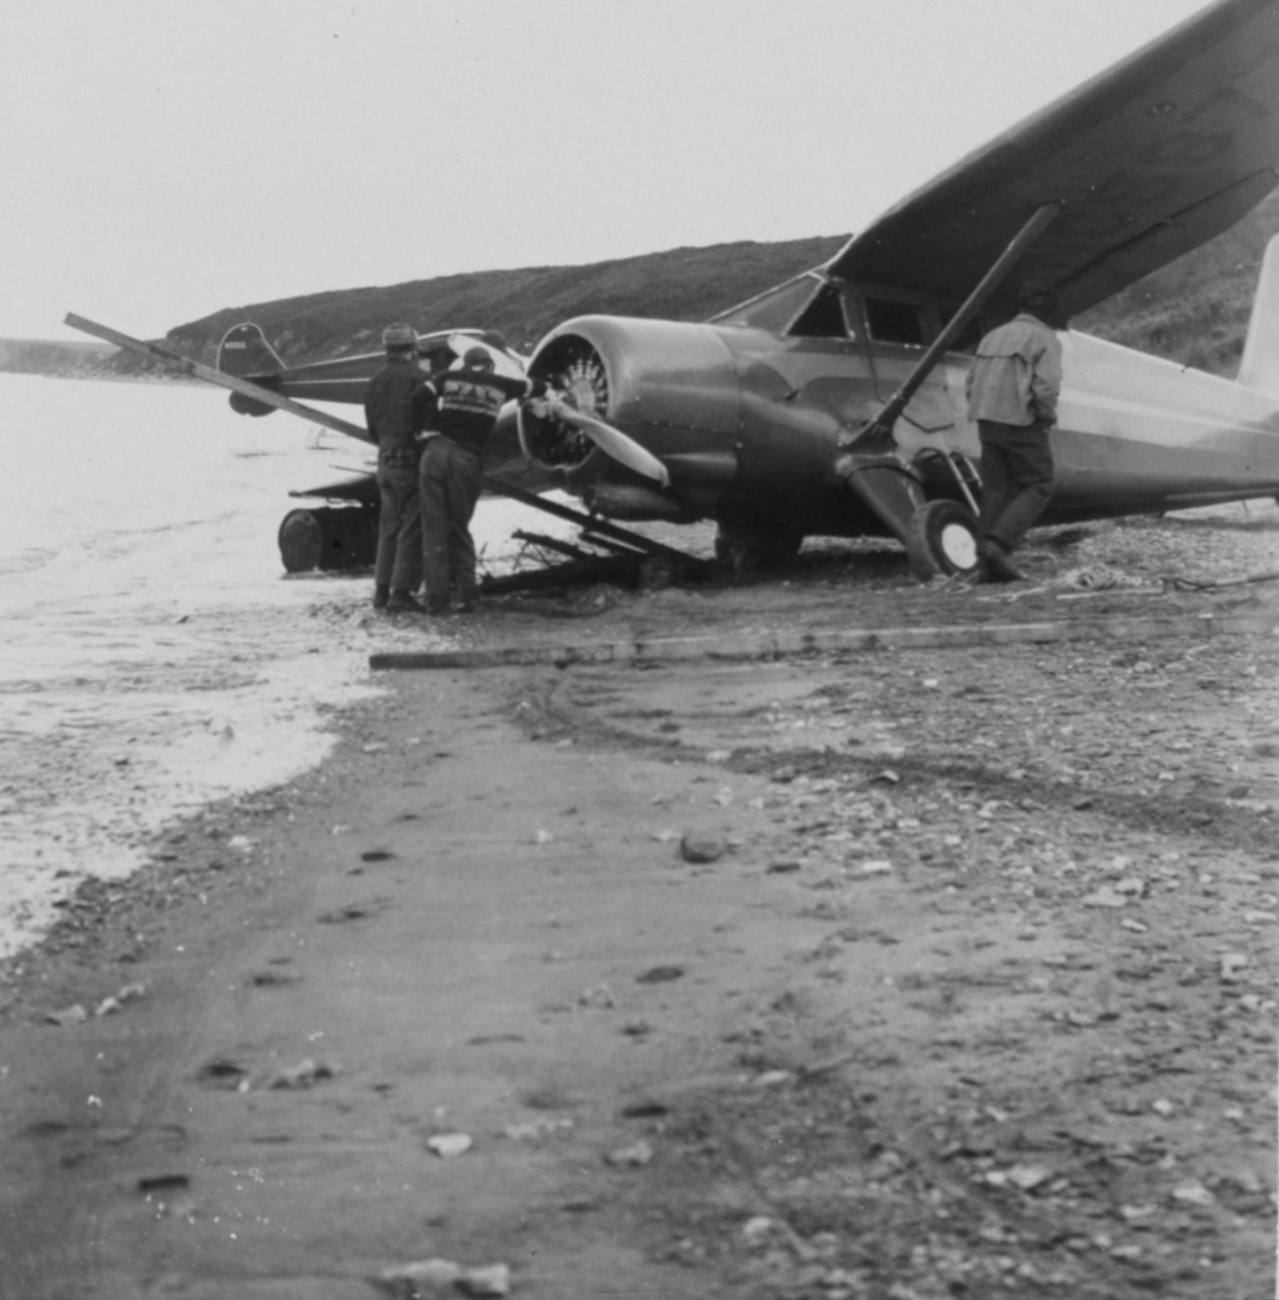 Stinson Gullwing with broken landing gear following hitting a pothole whenlanding on the beach